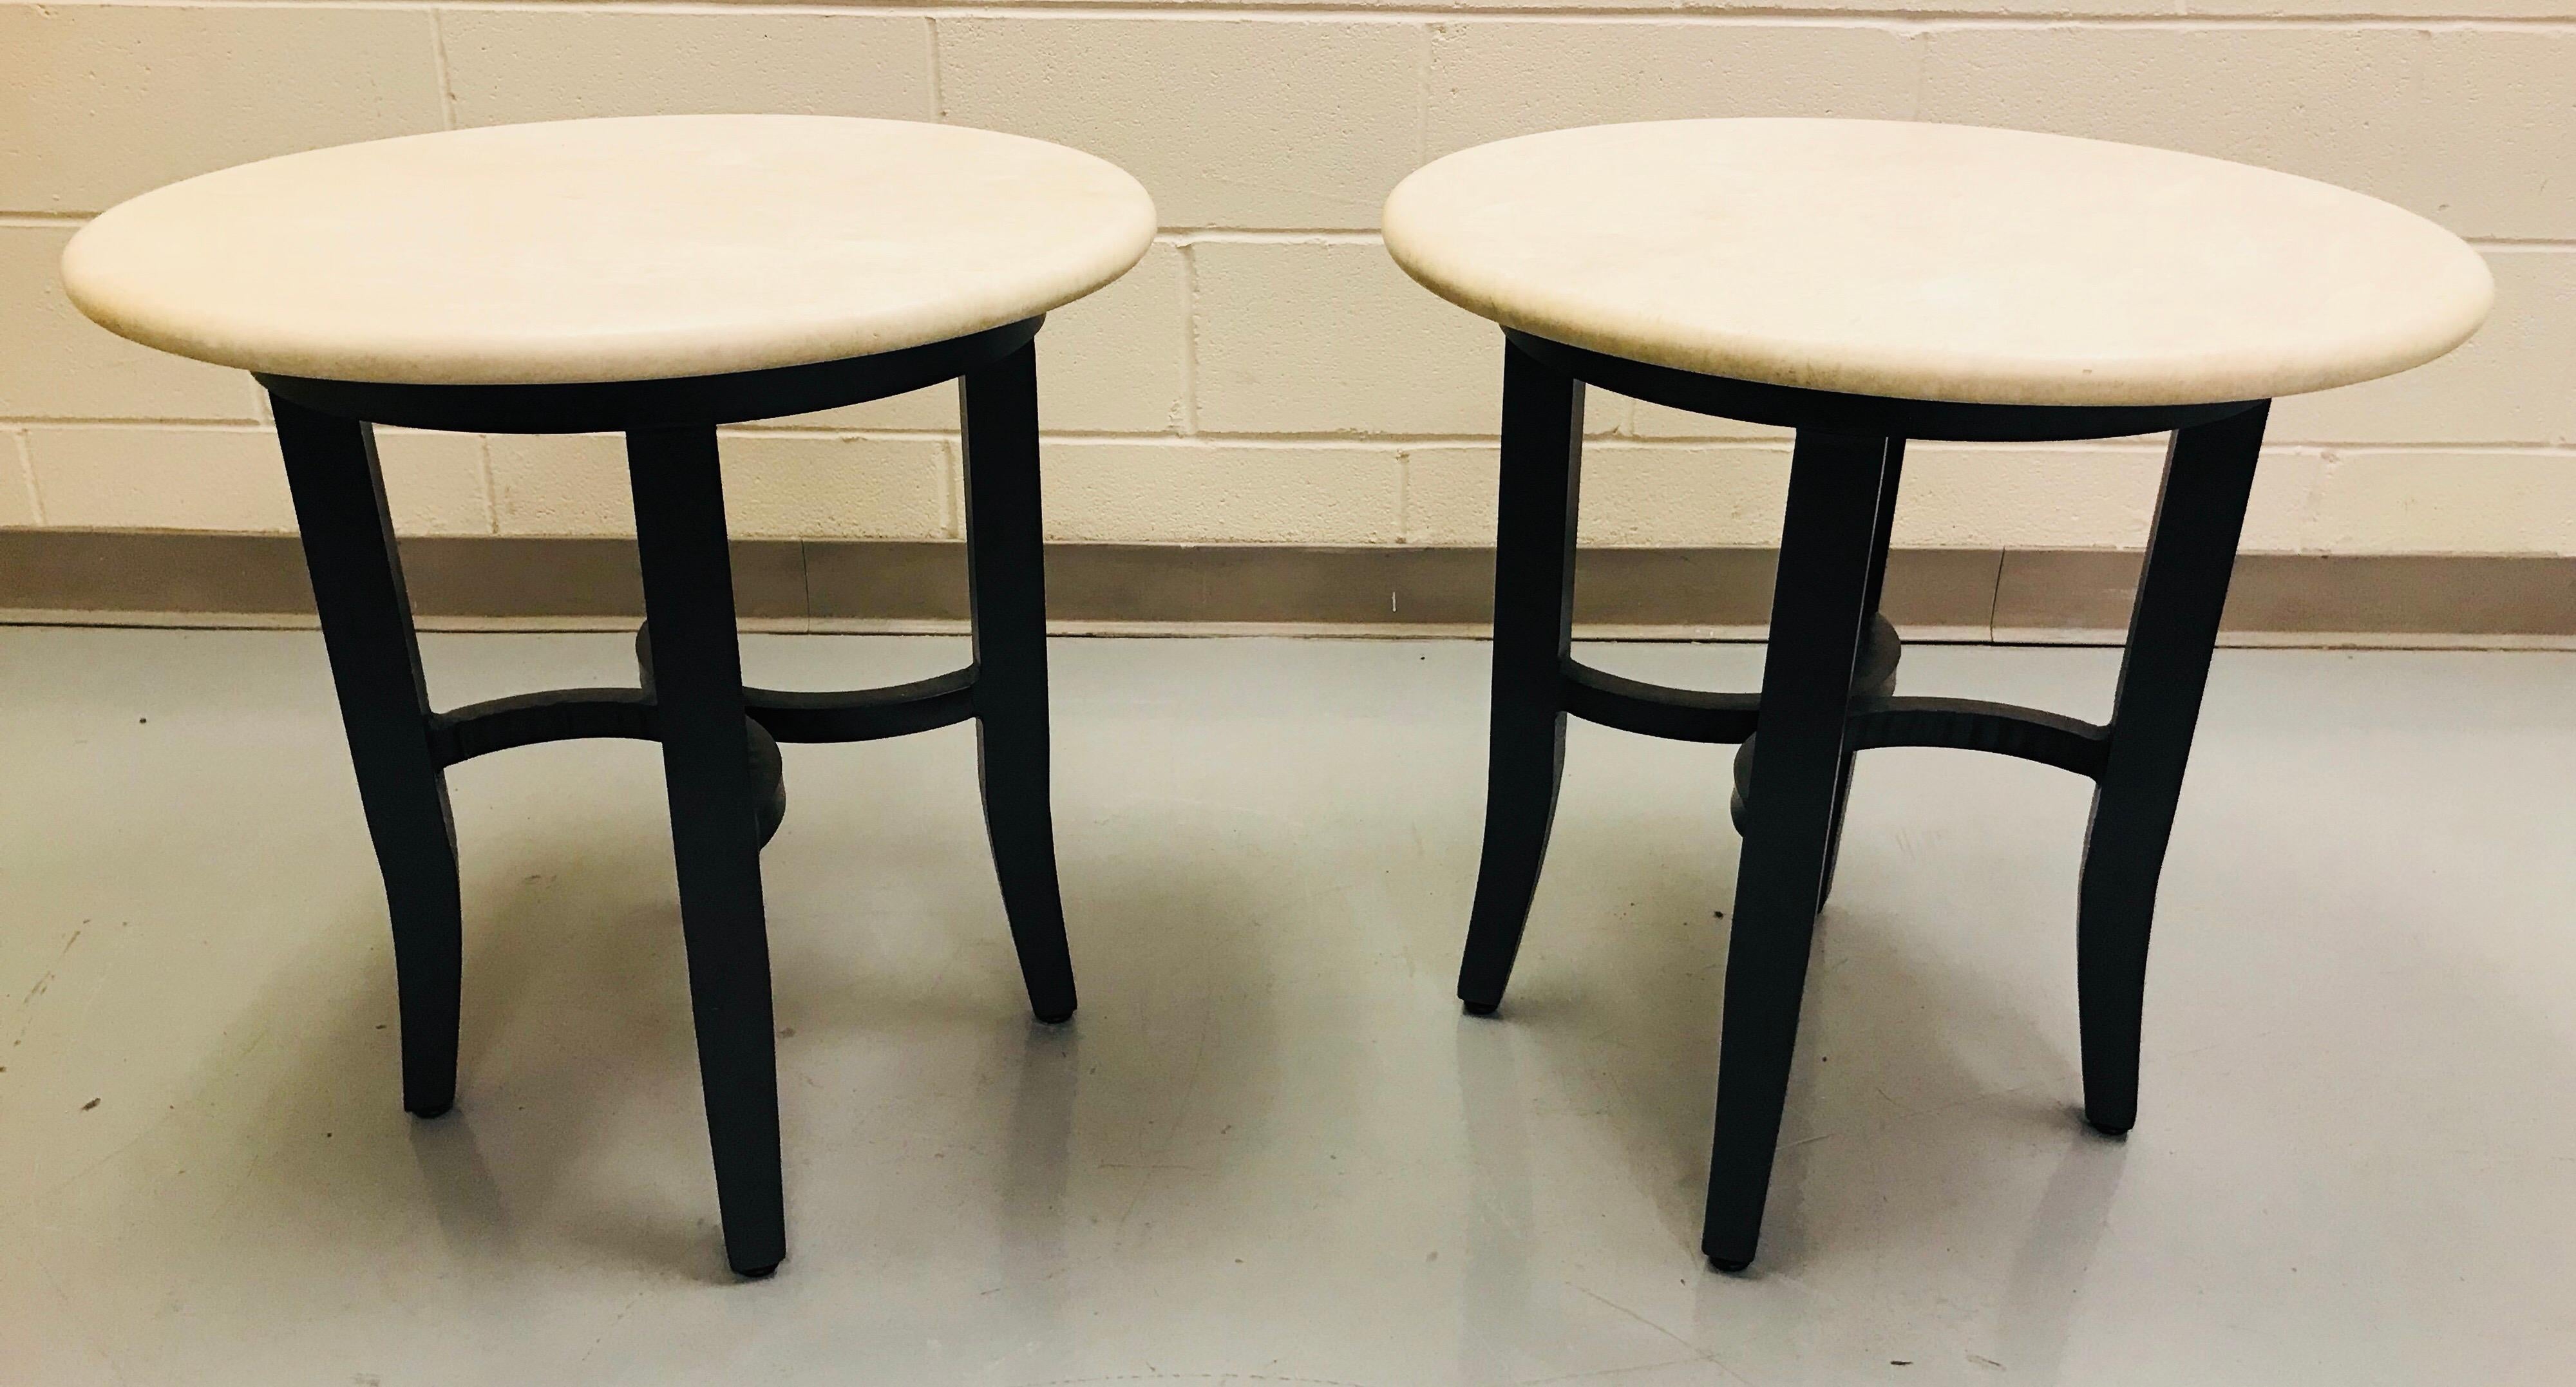 Kreiss collection pair of end tables with a powder coated aluminum base and travertine top. They are for outdoor use but are also suitable for indoor use as well. This pair was never outdoors and were used for the interior of an estate.